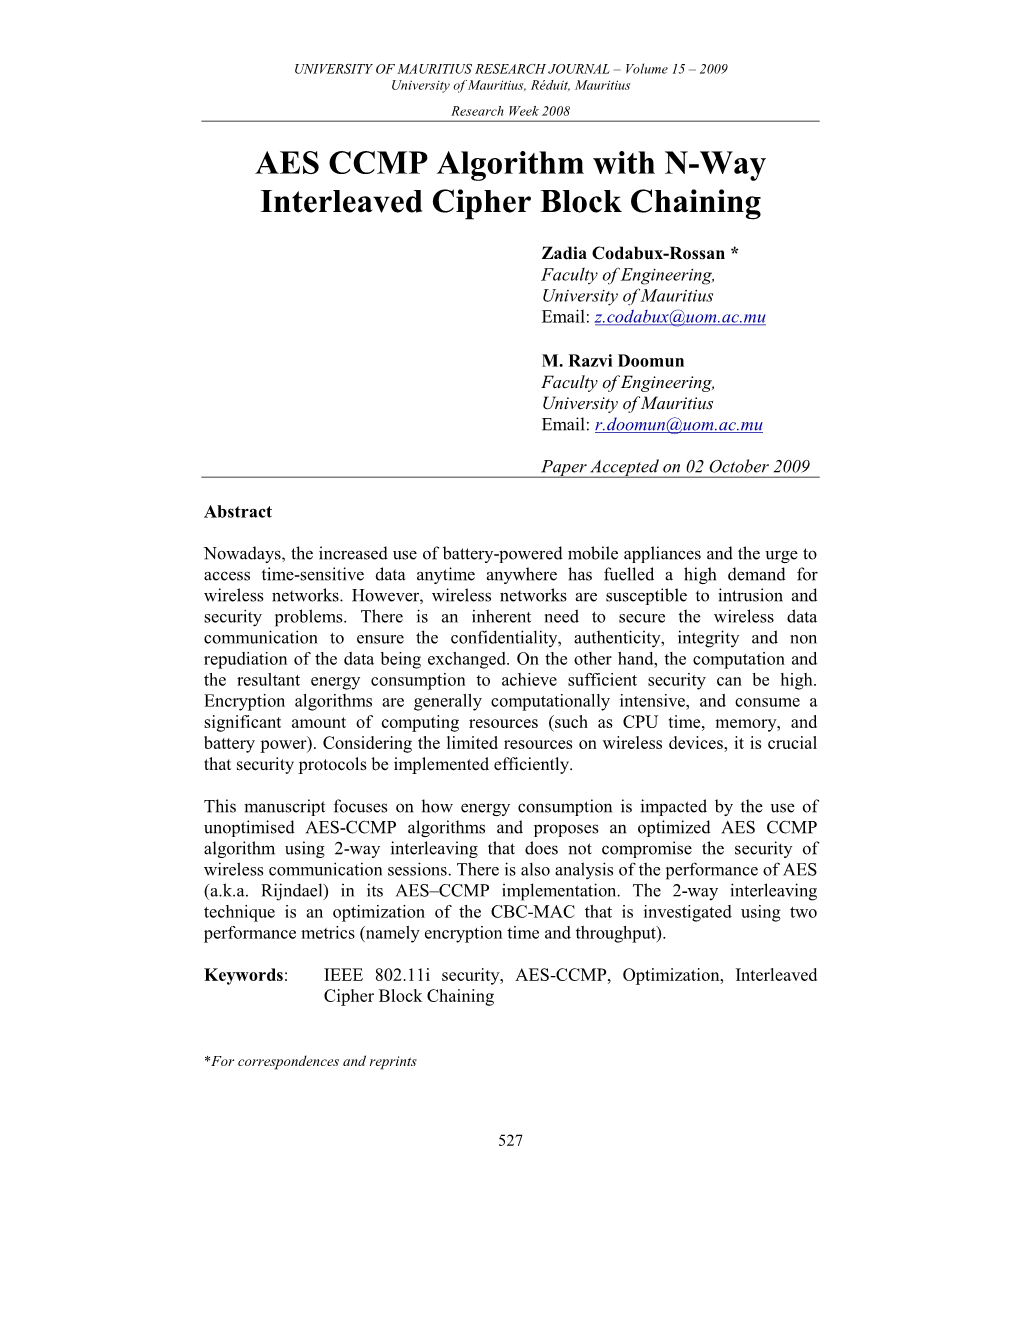 AES CCMP Algorithm with -Way Interleaved Cipher Block Chaining